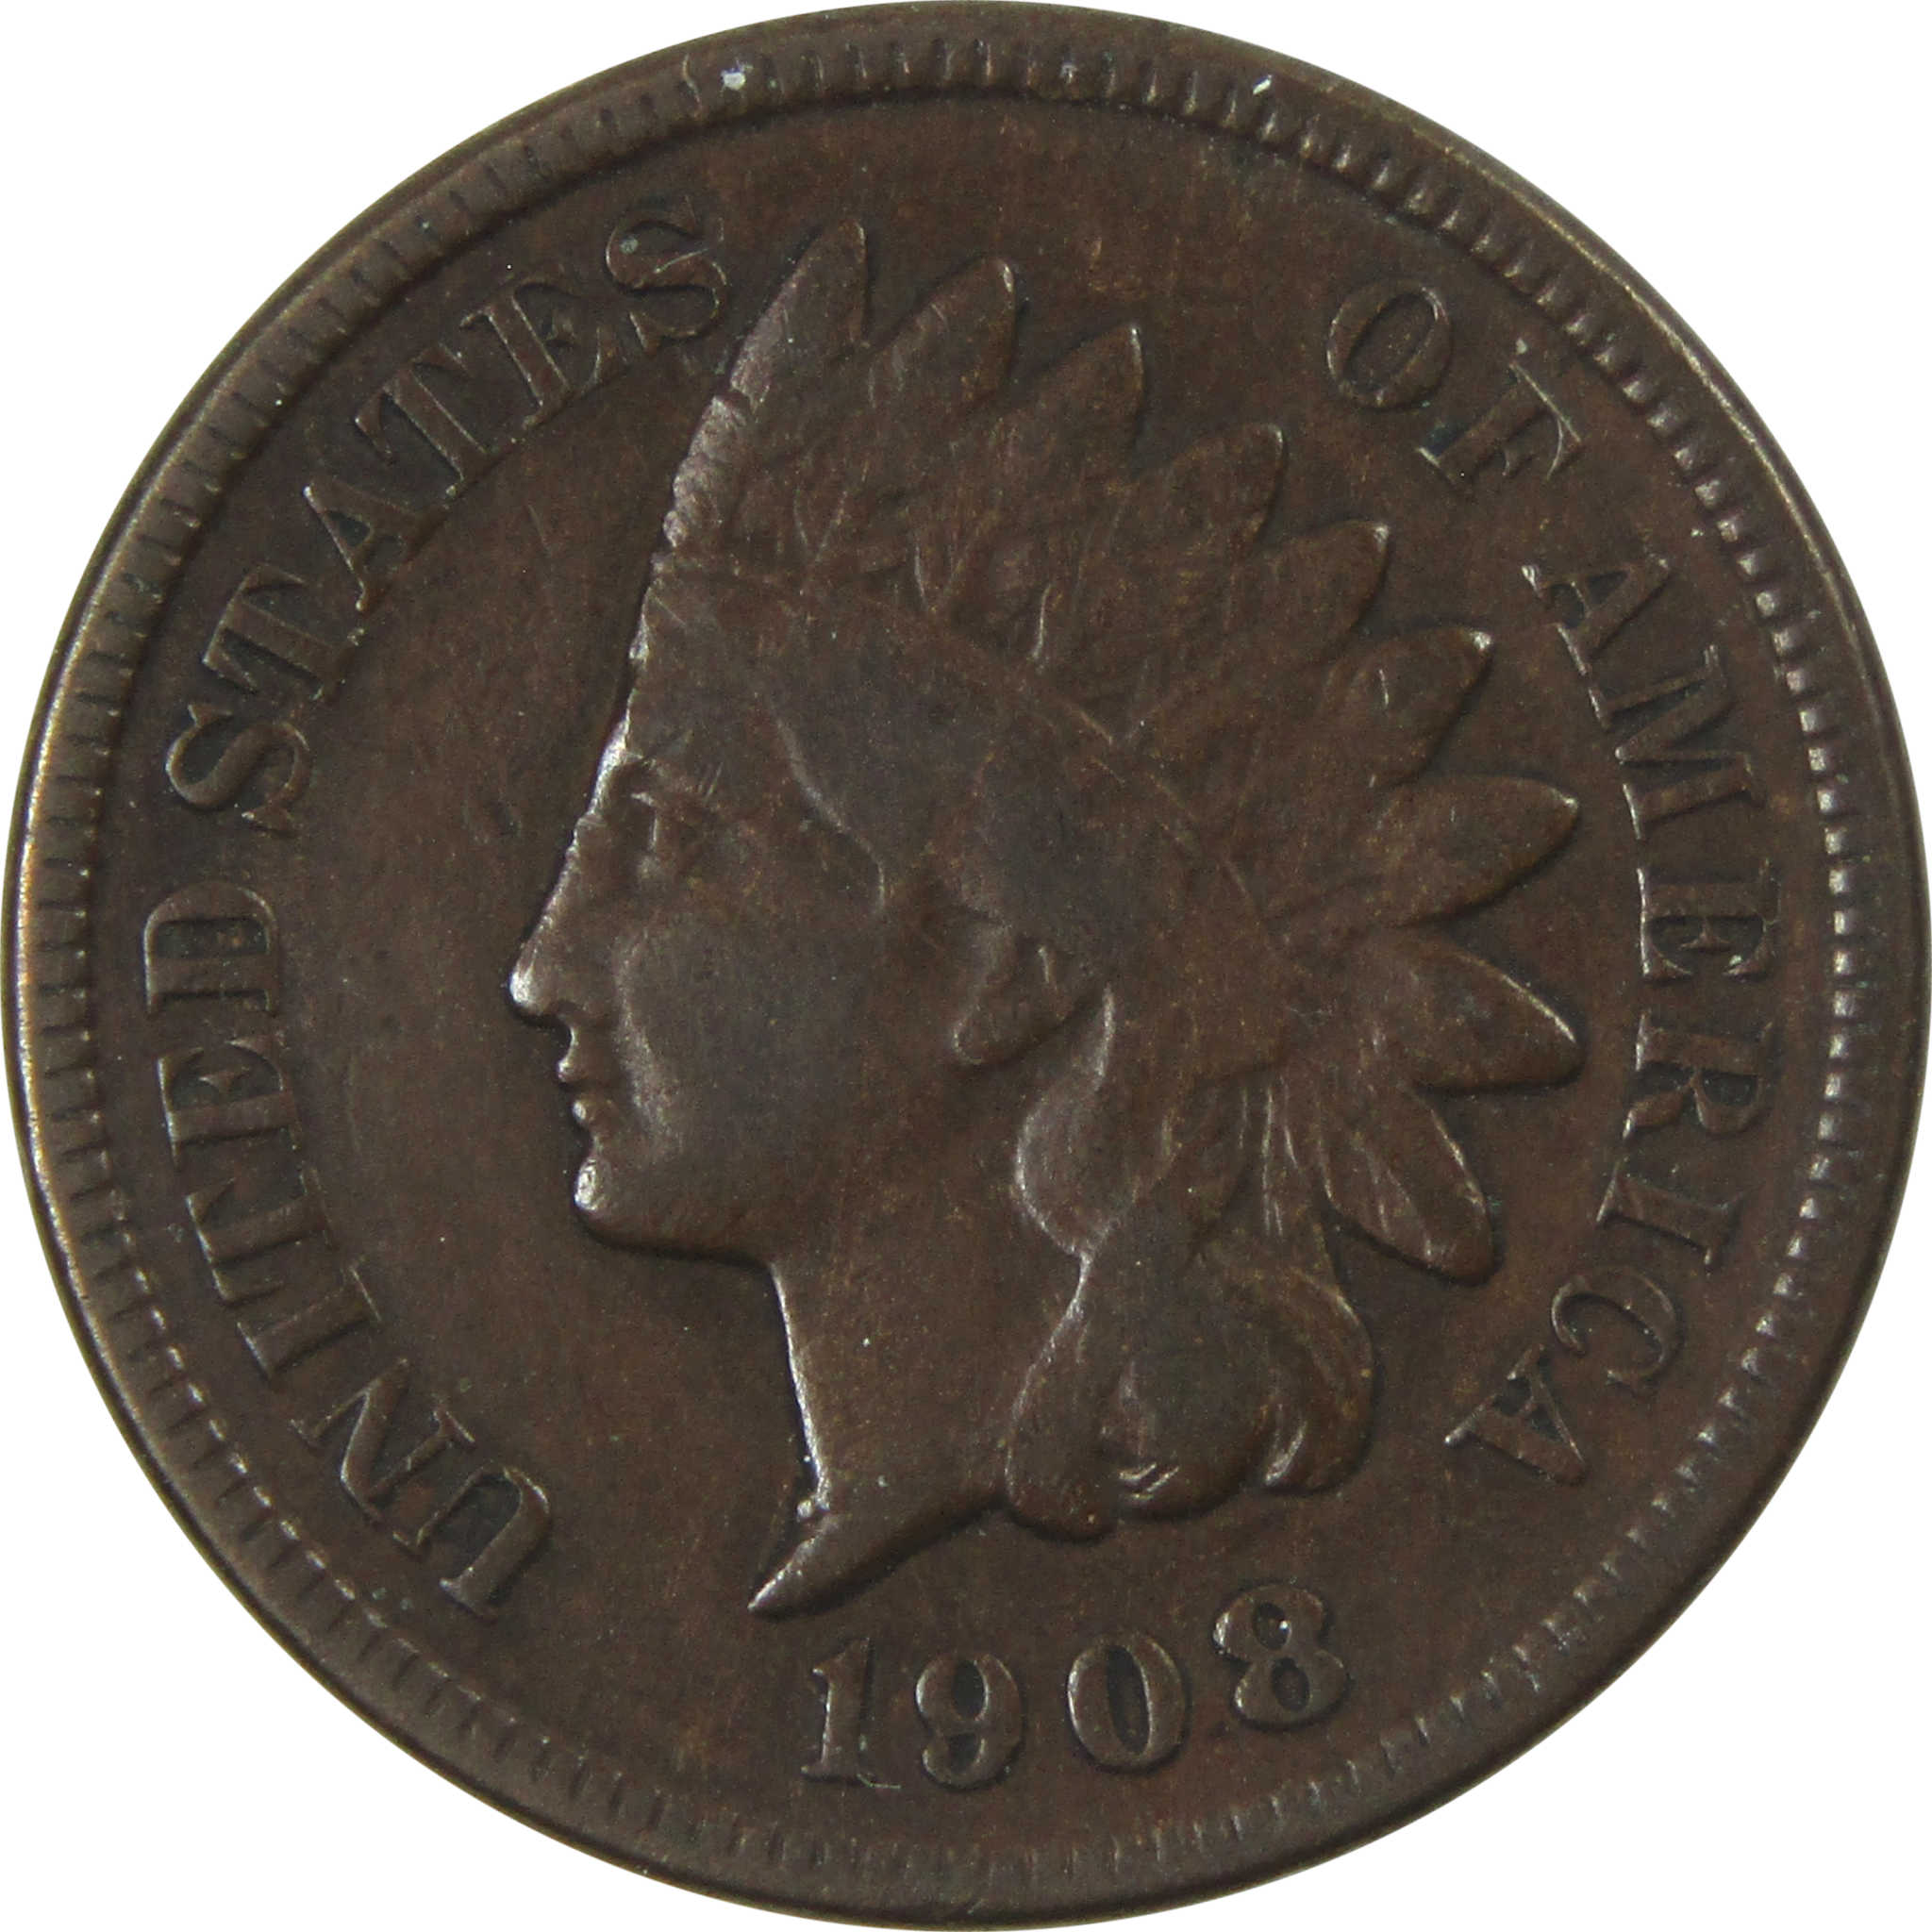 1908 S Indian Head Cent VG Very Good Penny 1c Coin SKU:I13943